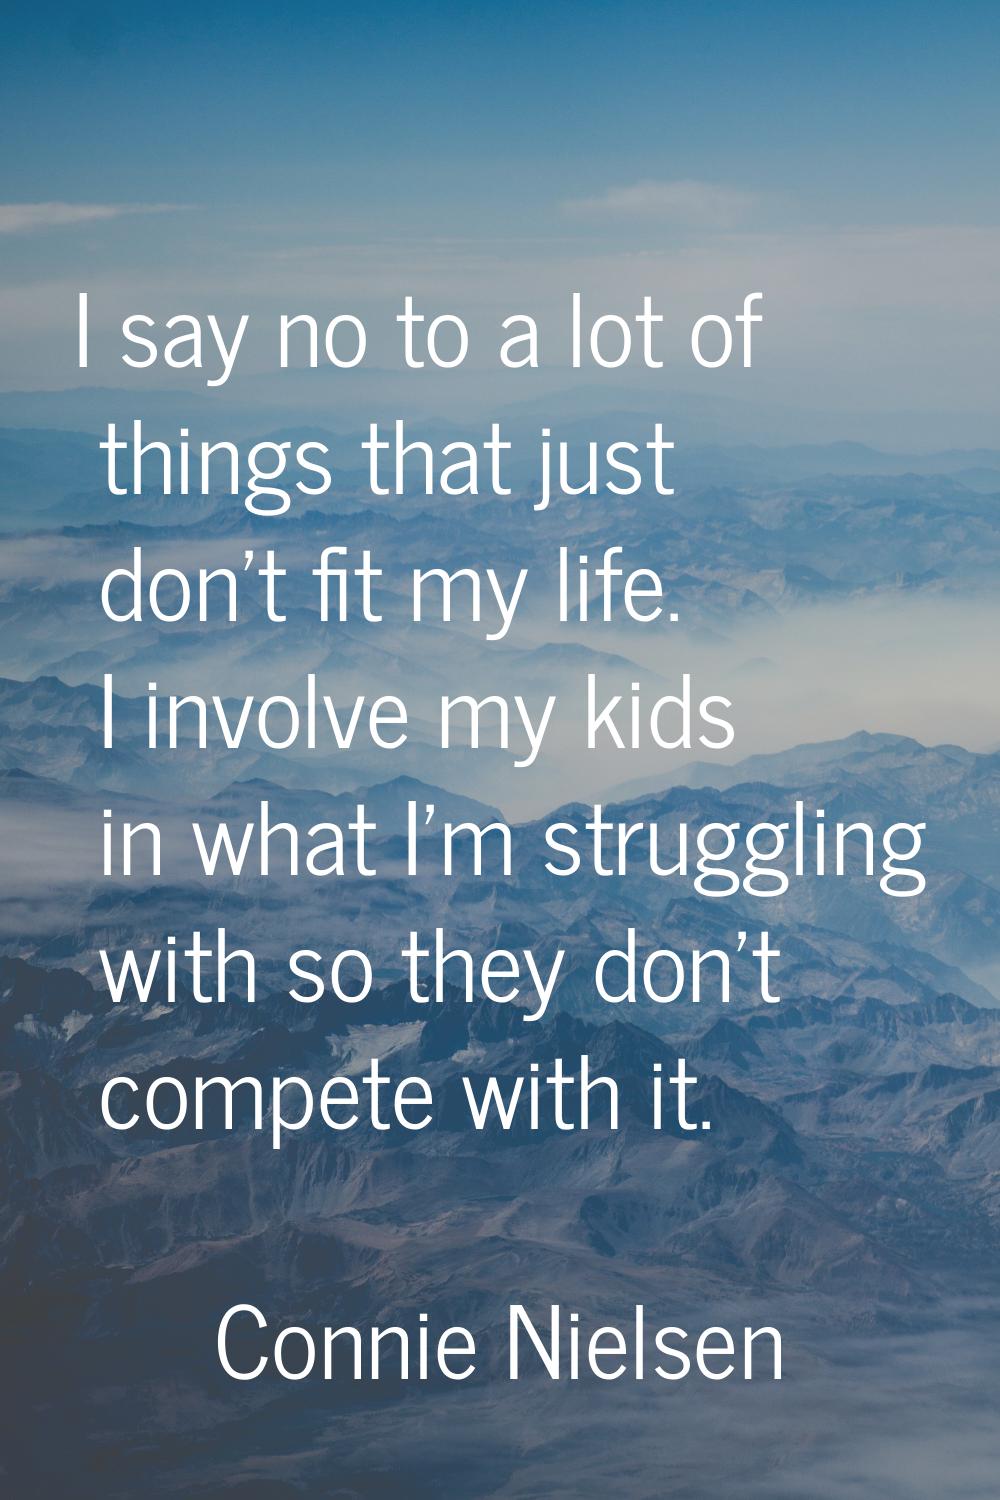 I say no to a lot of things that just don't fit my life. I involve my kids in what I'm struggling w